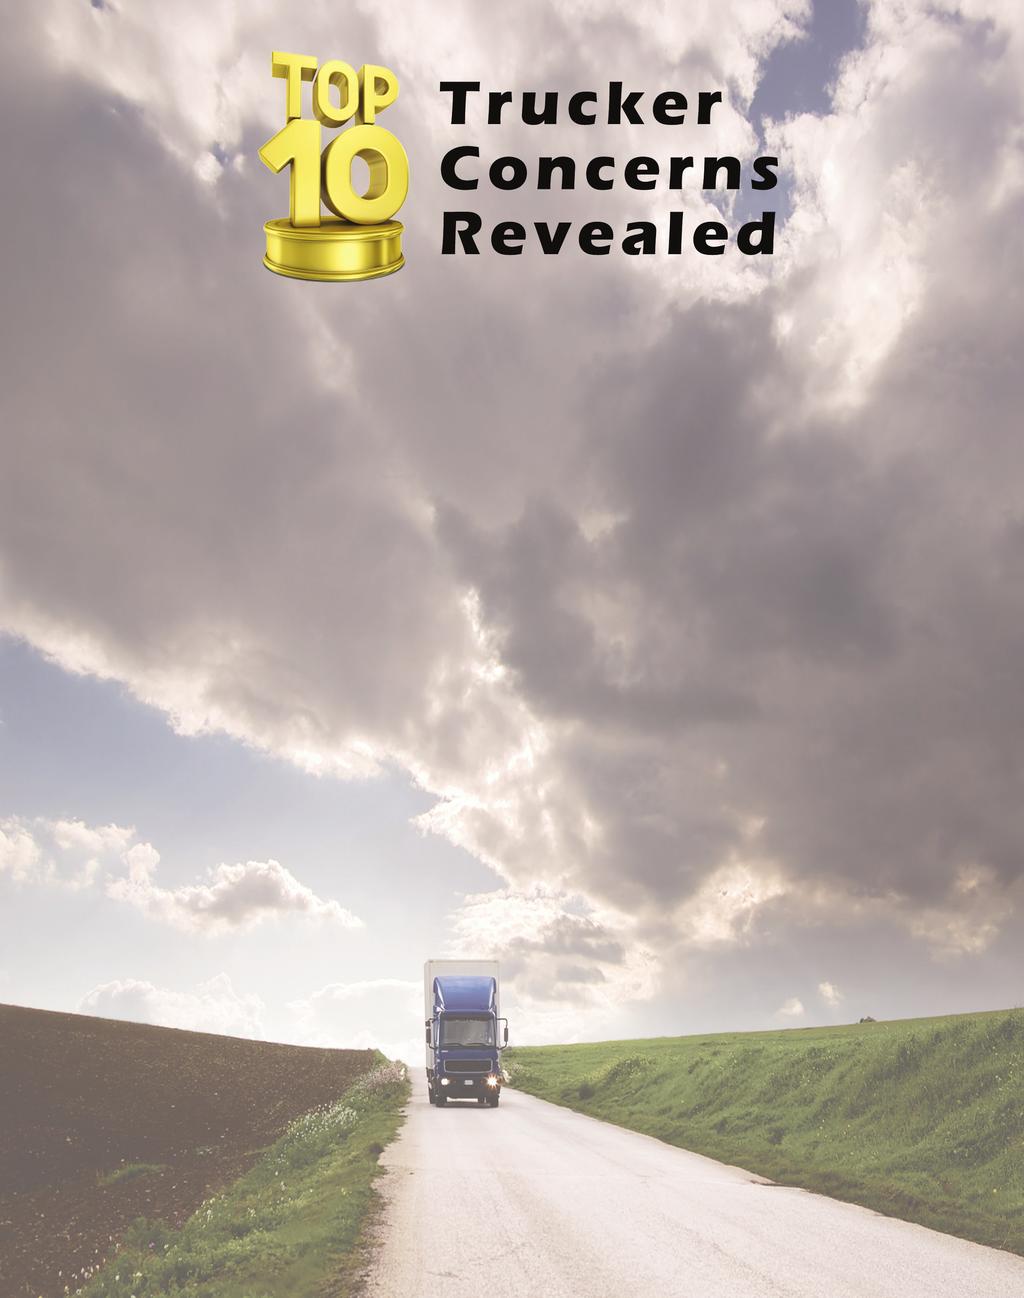 The American Transportation Research Institute (ATRI), the trucking industry s not-for-profit research organization, has released its 2012 list of the top 10 critical issues facing the North American